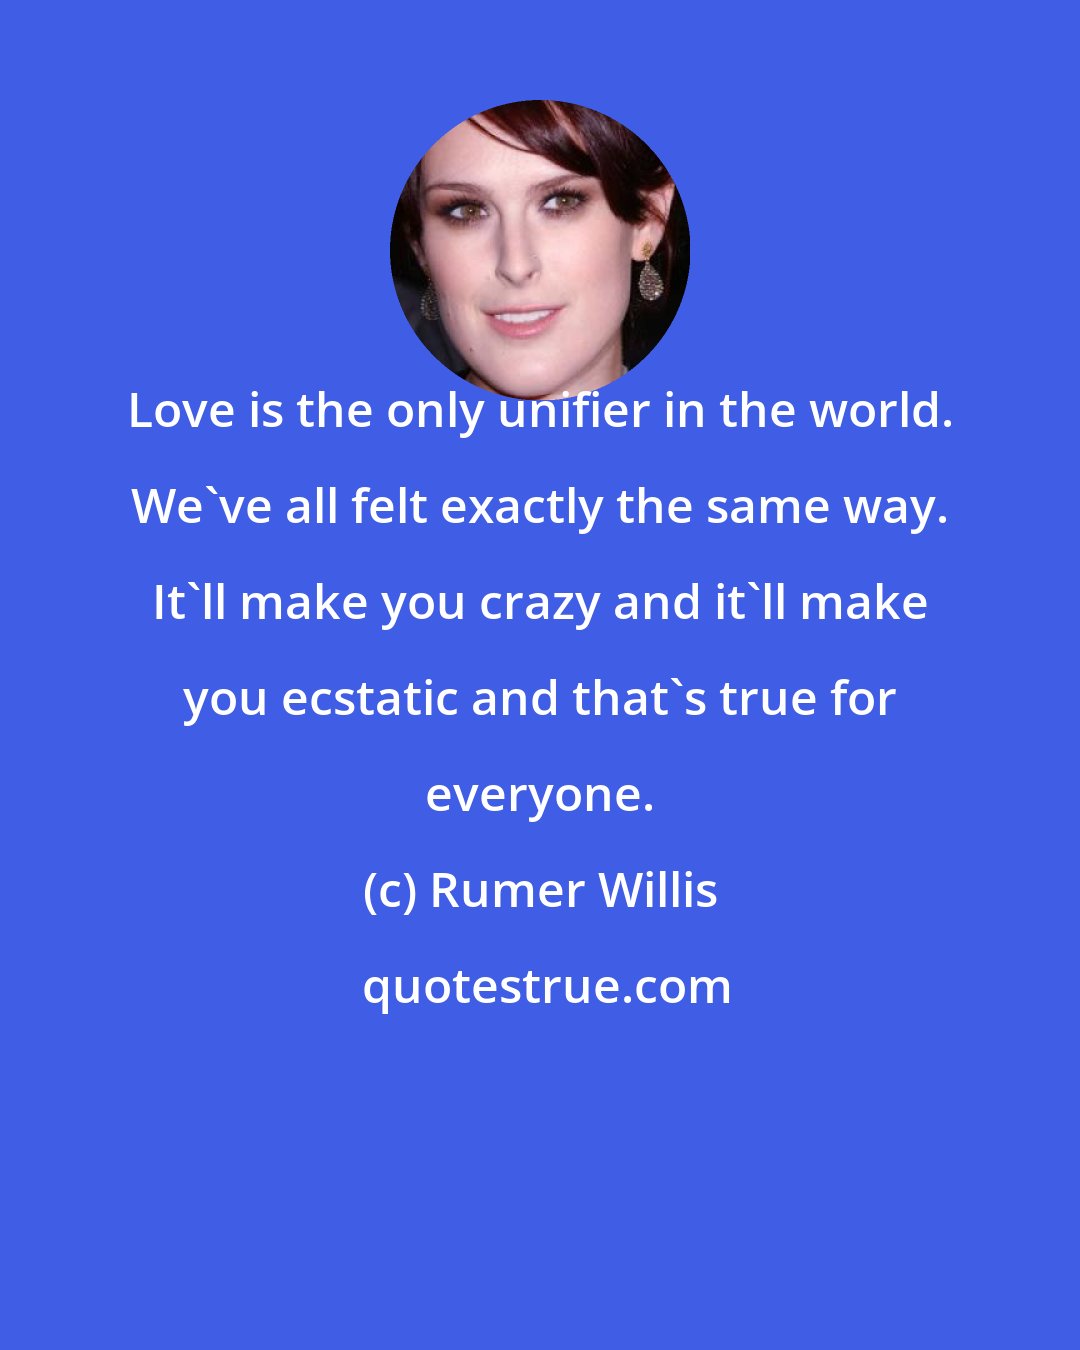 Rumer Willis: Love is the only unifier in the world. We've all felt exactly the same way. It'll make you crazy and it'll make you ecstatic and that's true for everyone.